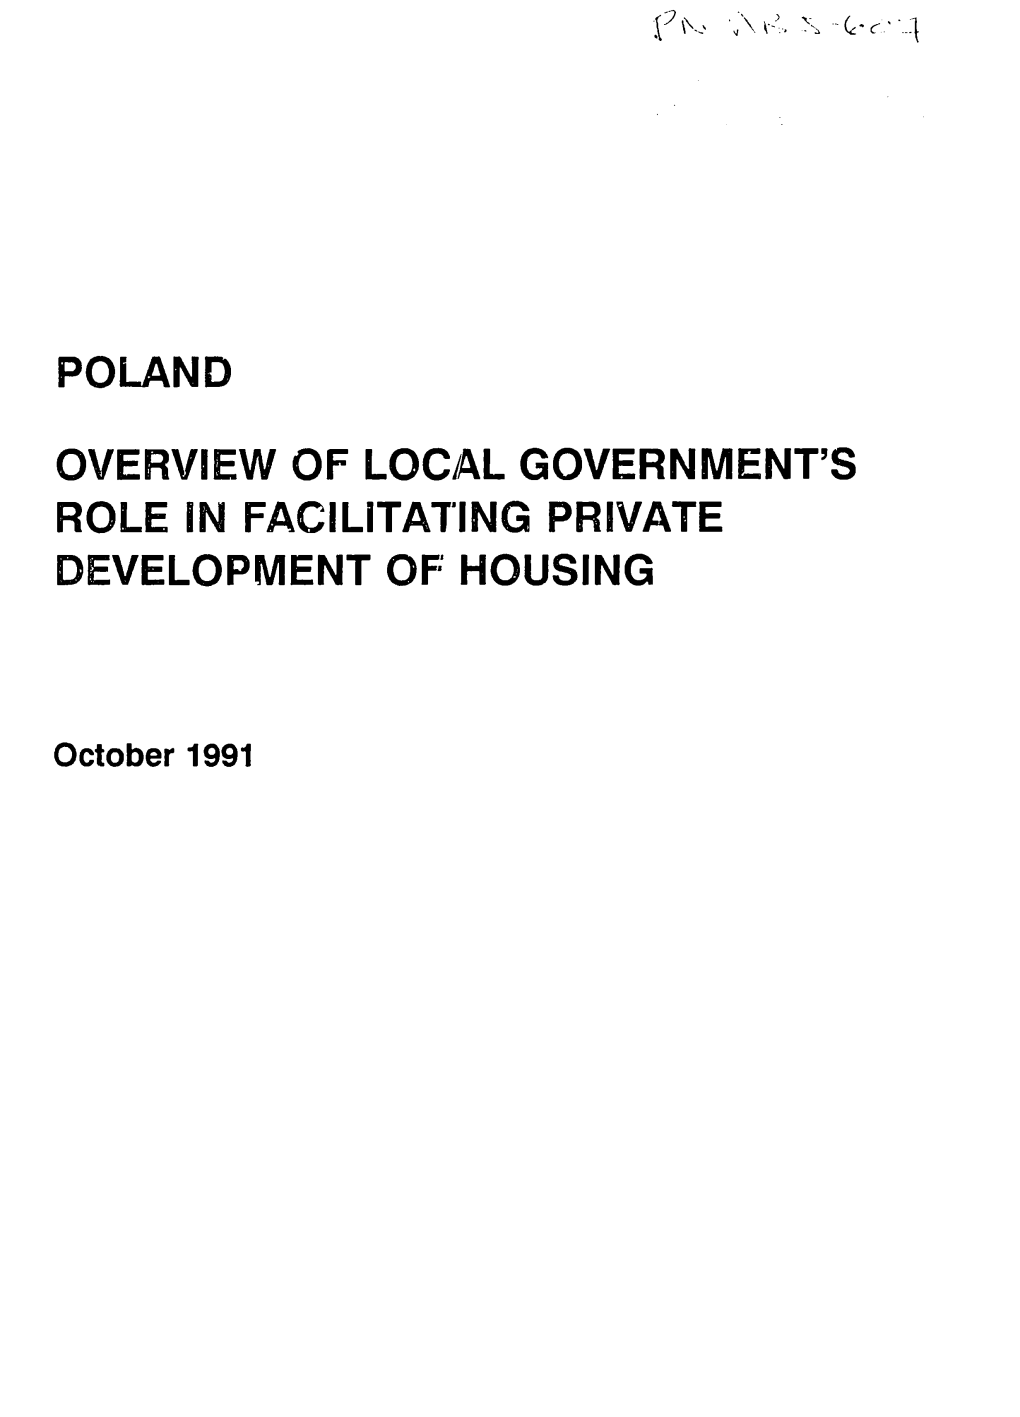 Poland Overview of Local Government's Role In